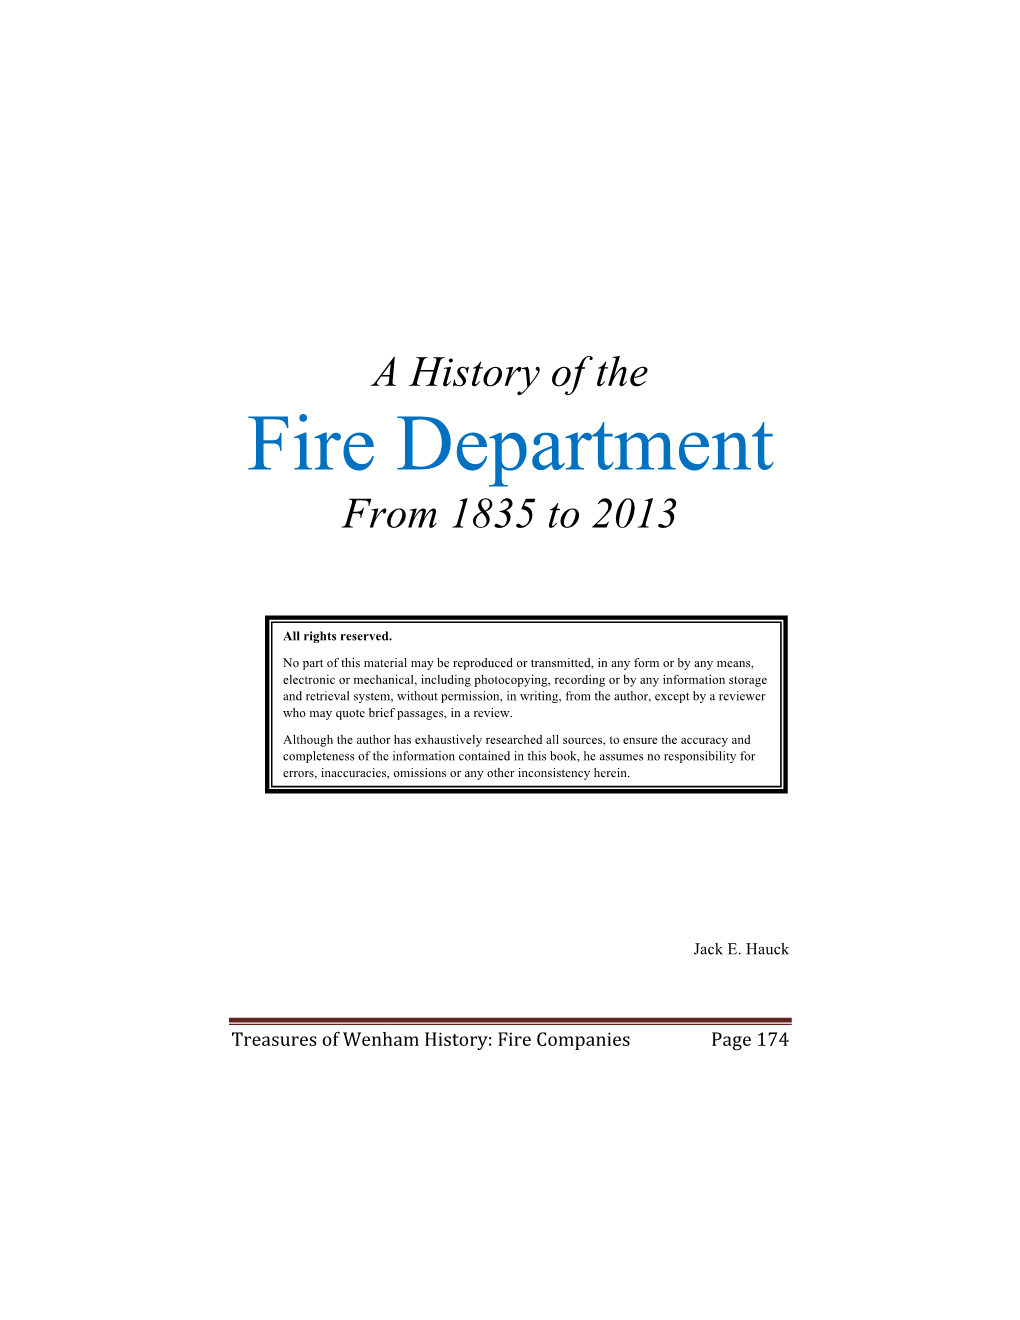 Fire Department from 1835 to 2013